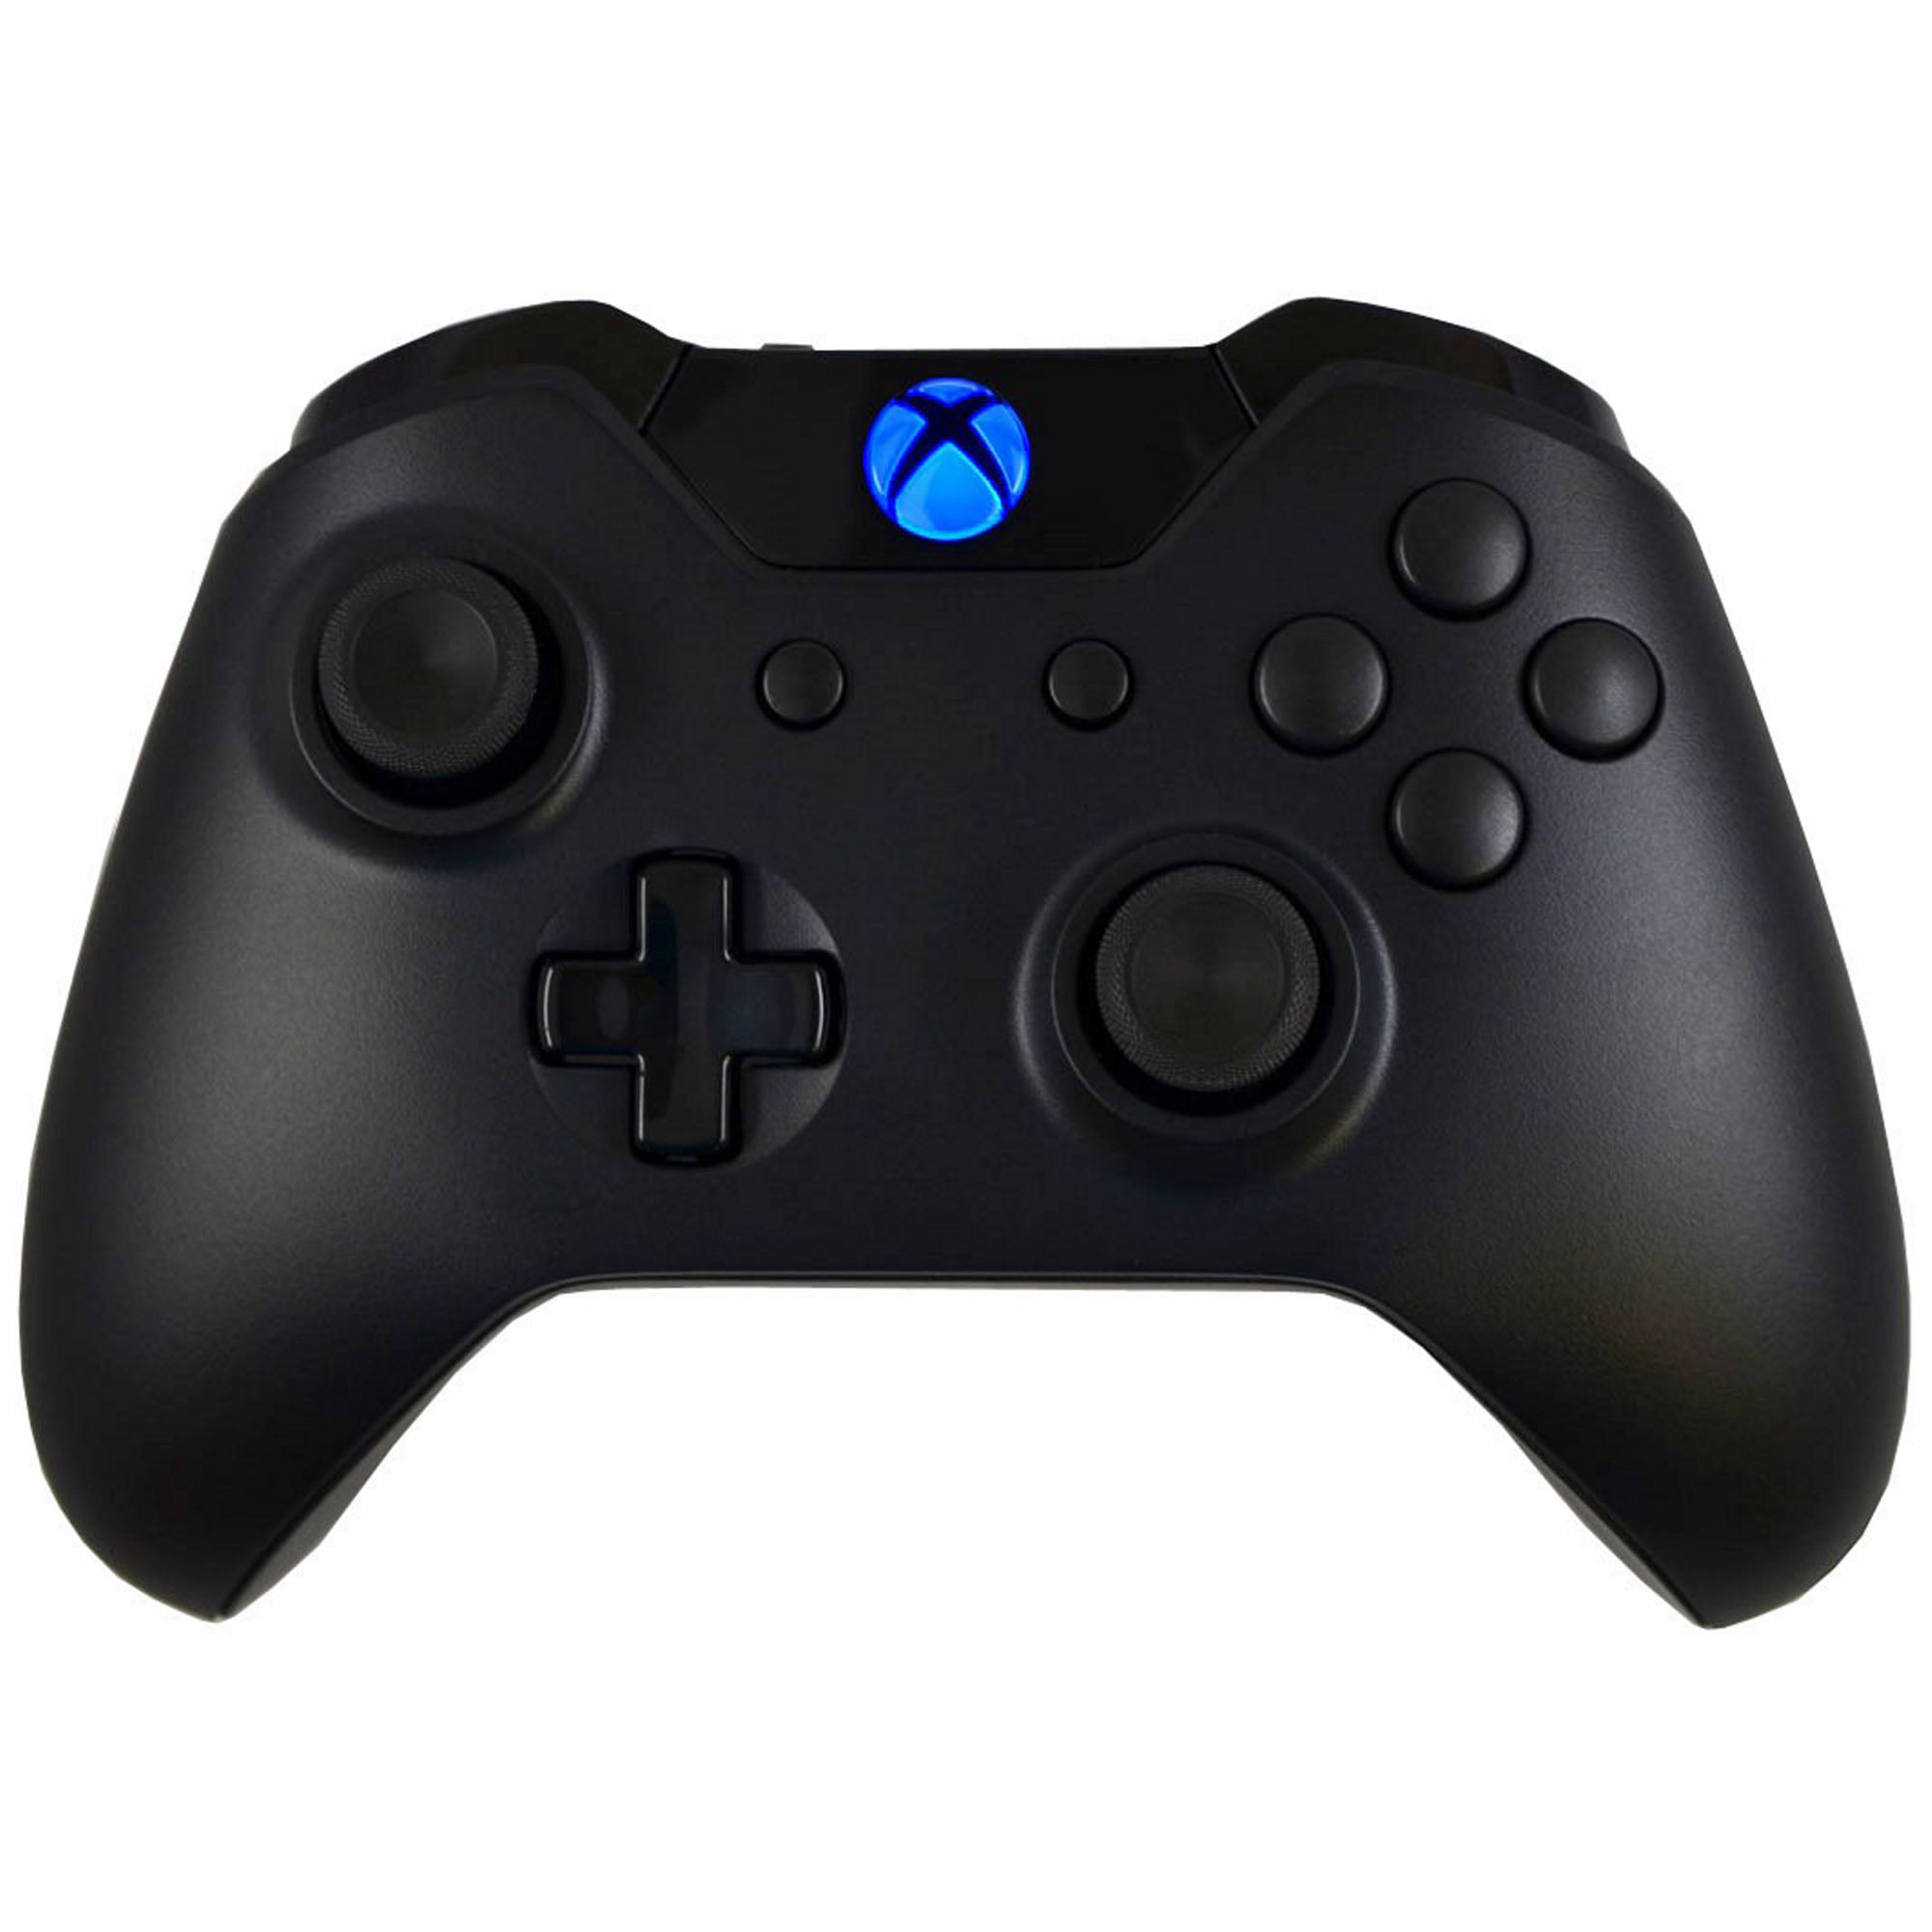 Black Out Xbox One Modded Controller For All Games Including Call - roblox phantom forces moddedmod